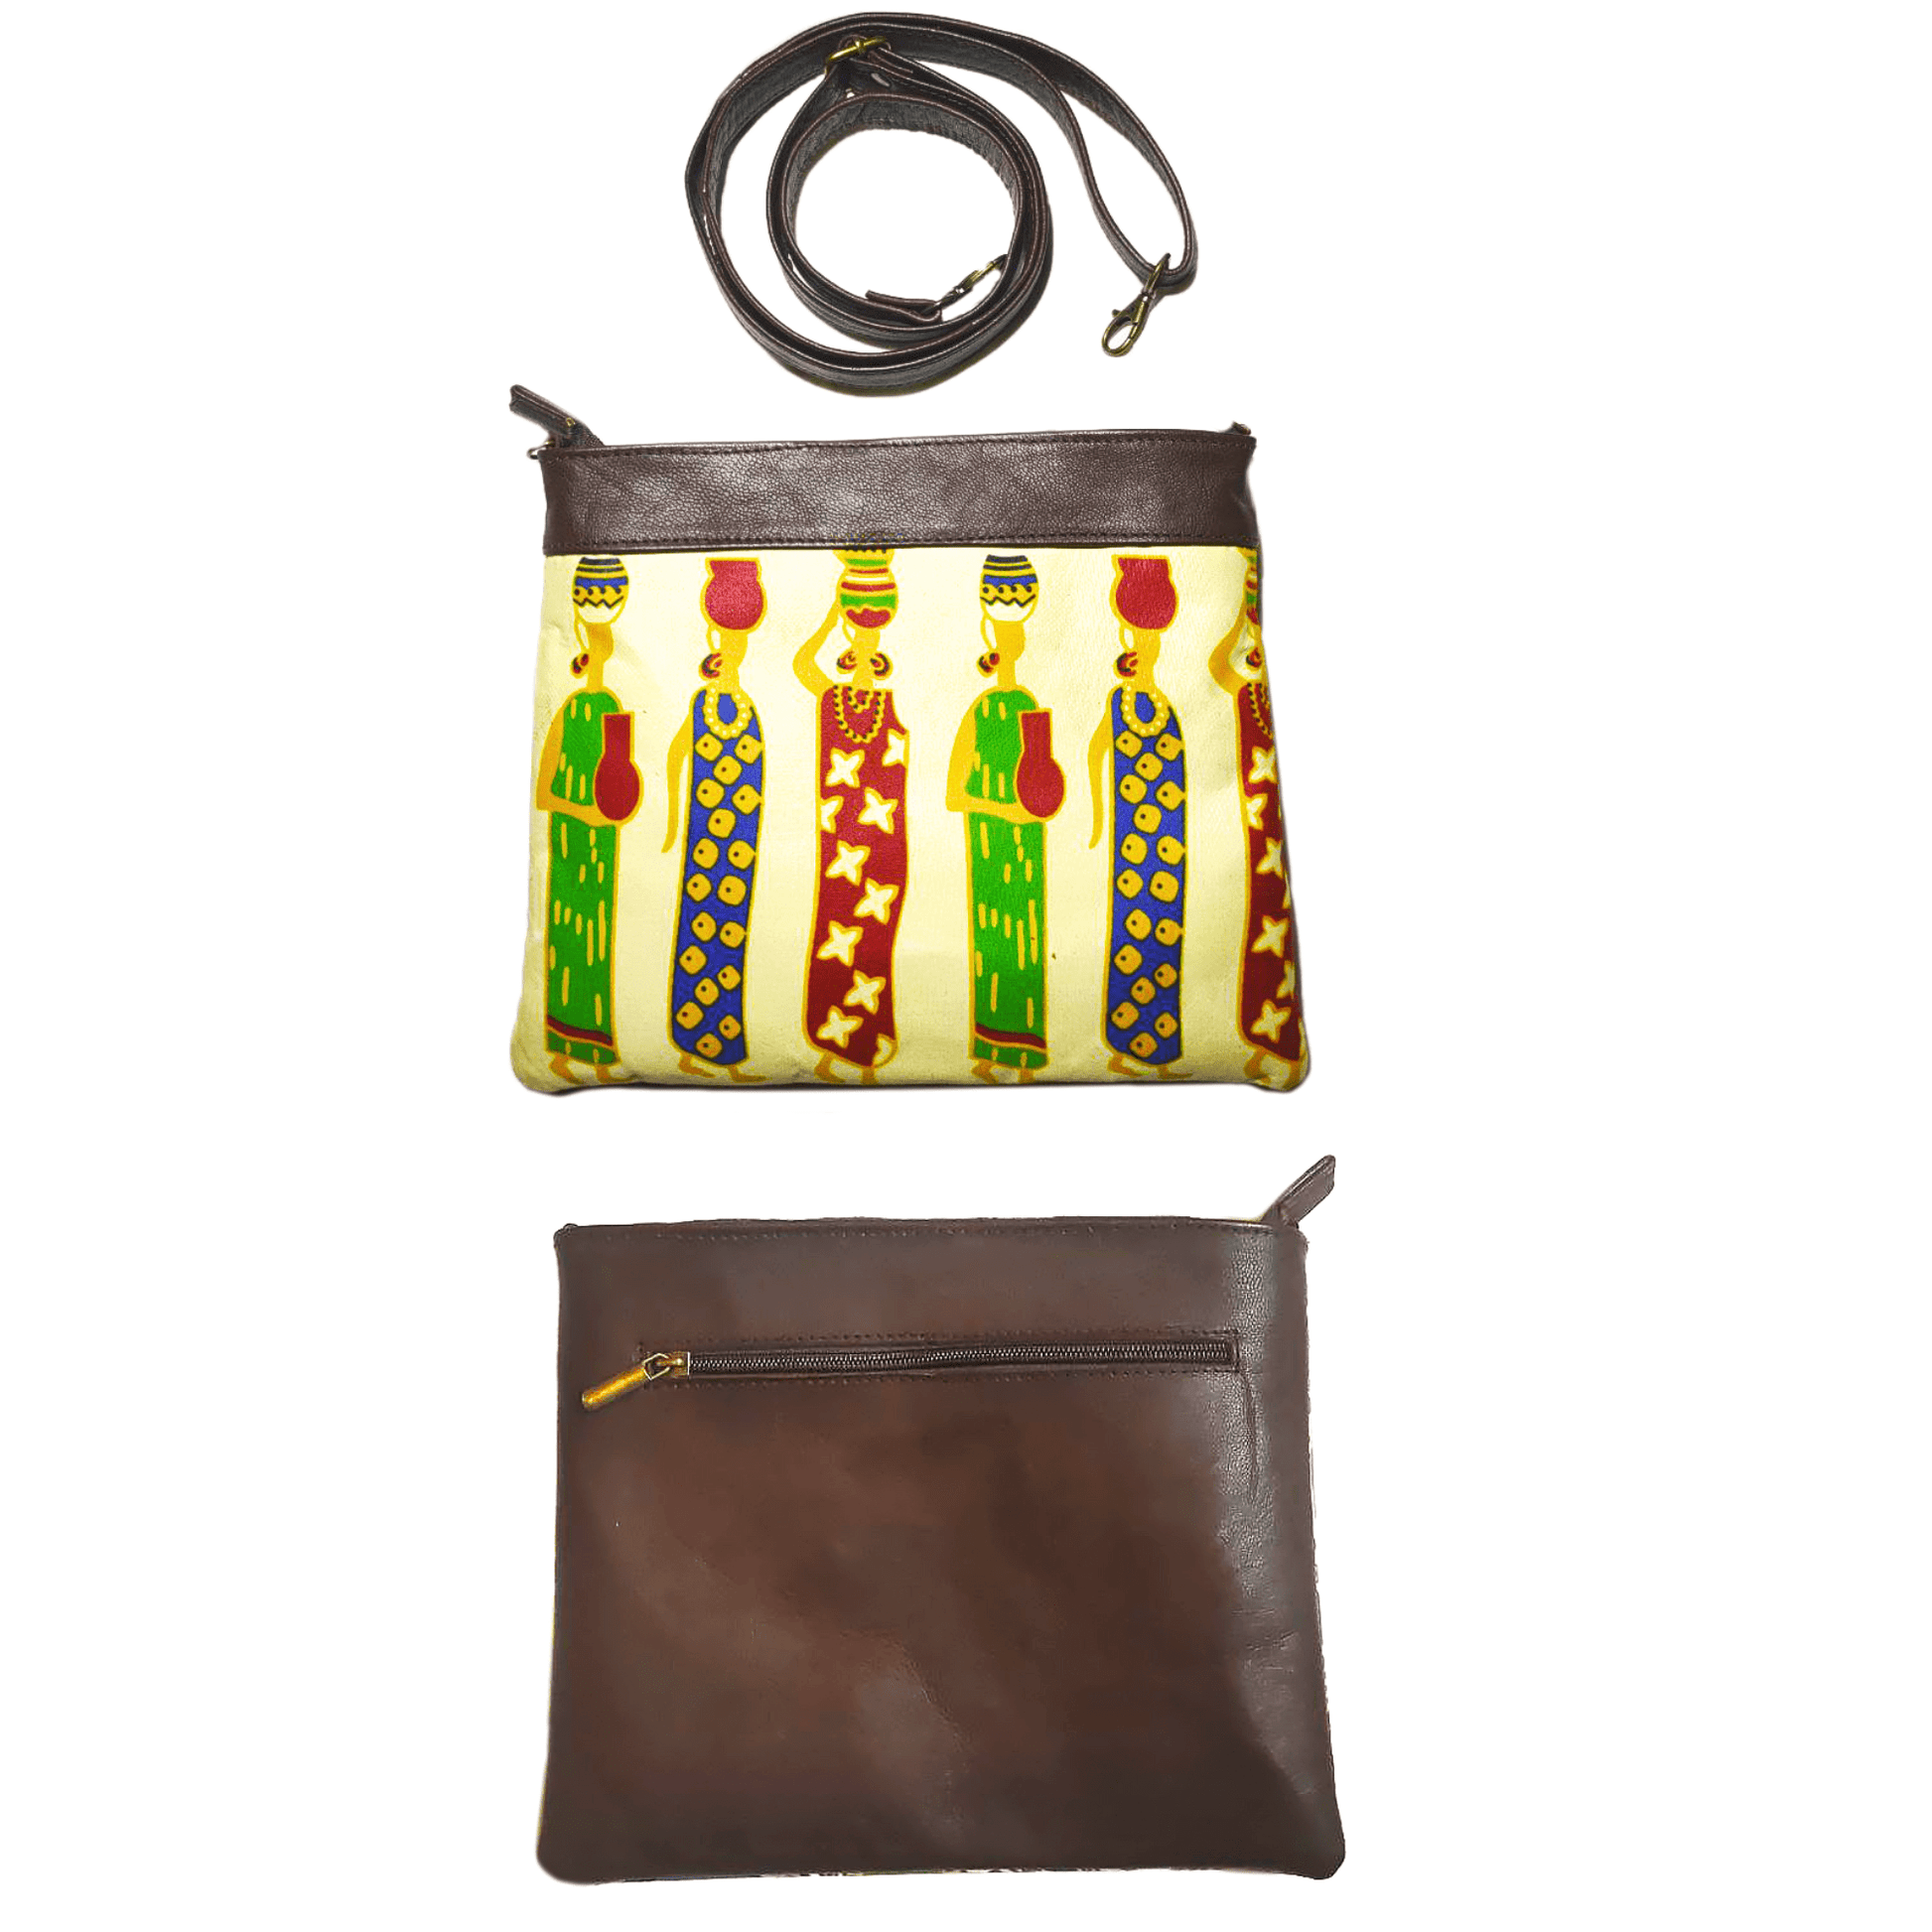 "Arabica" Leather Duffle Bag With Matched Clutch - Trendiesty Worldwide